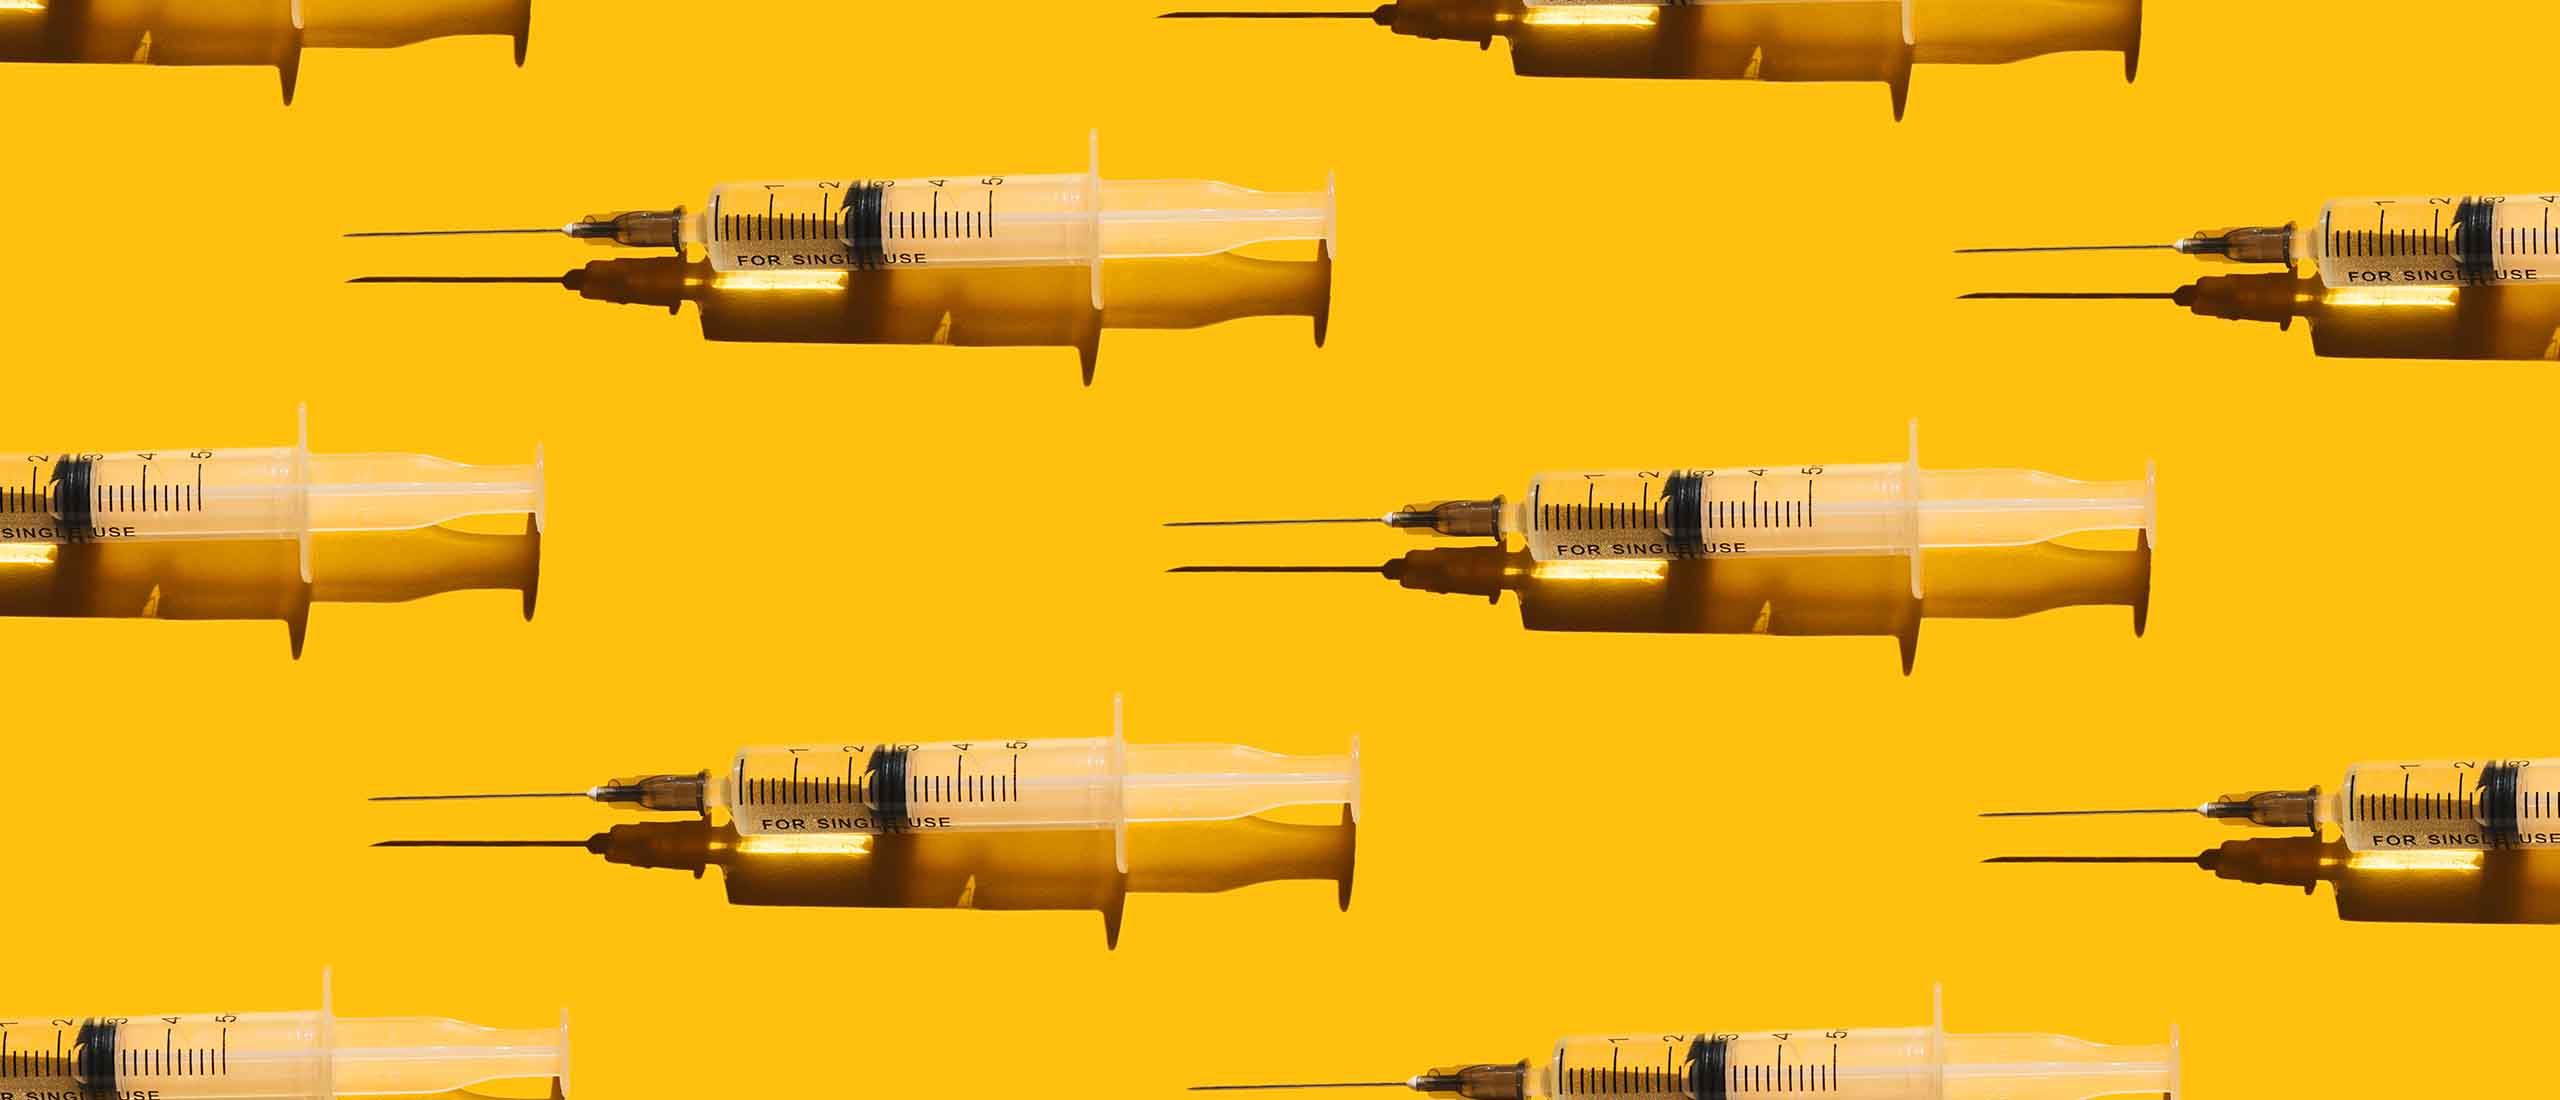 Syringes spread out over yellow counter